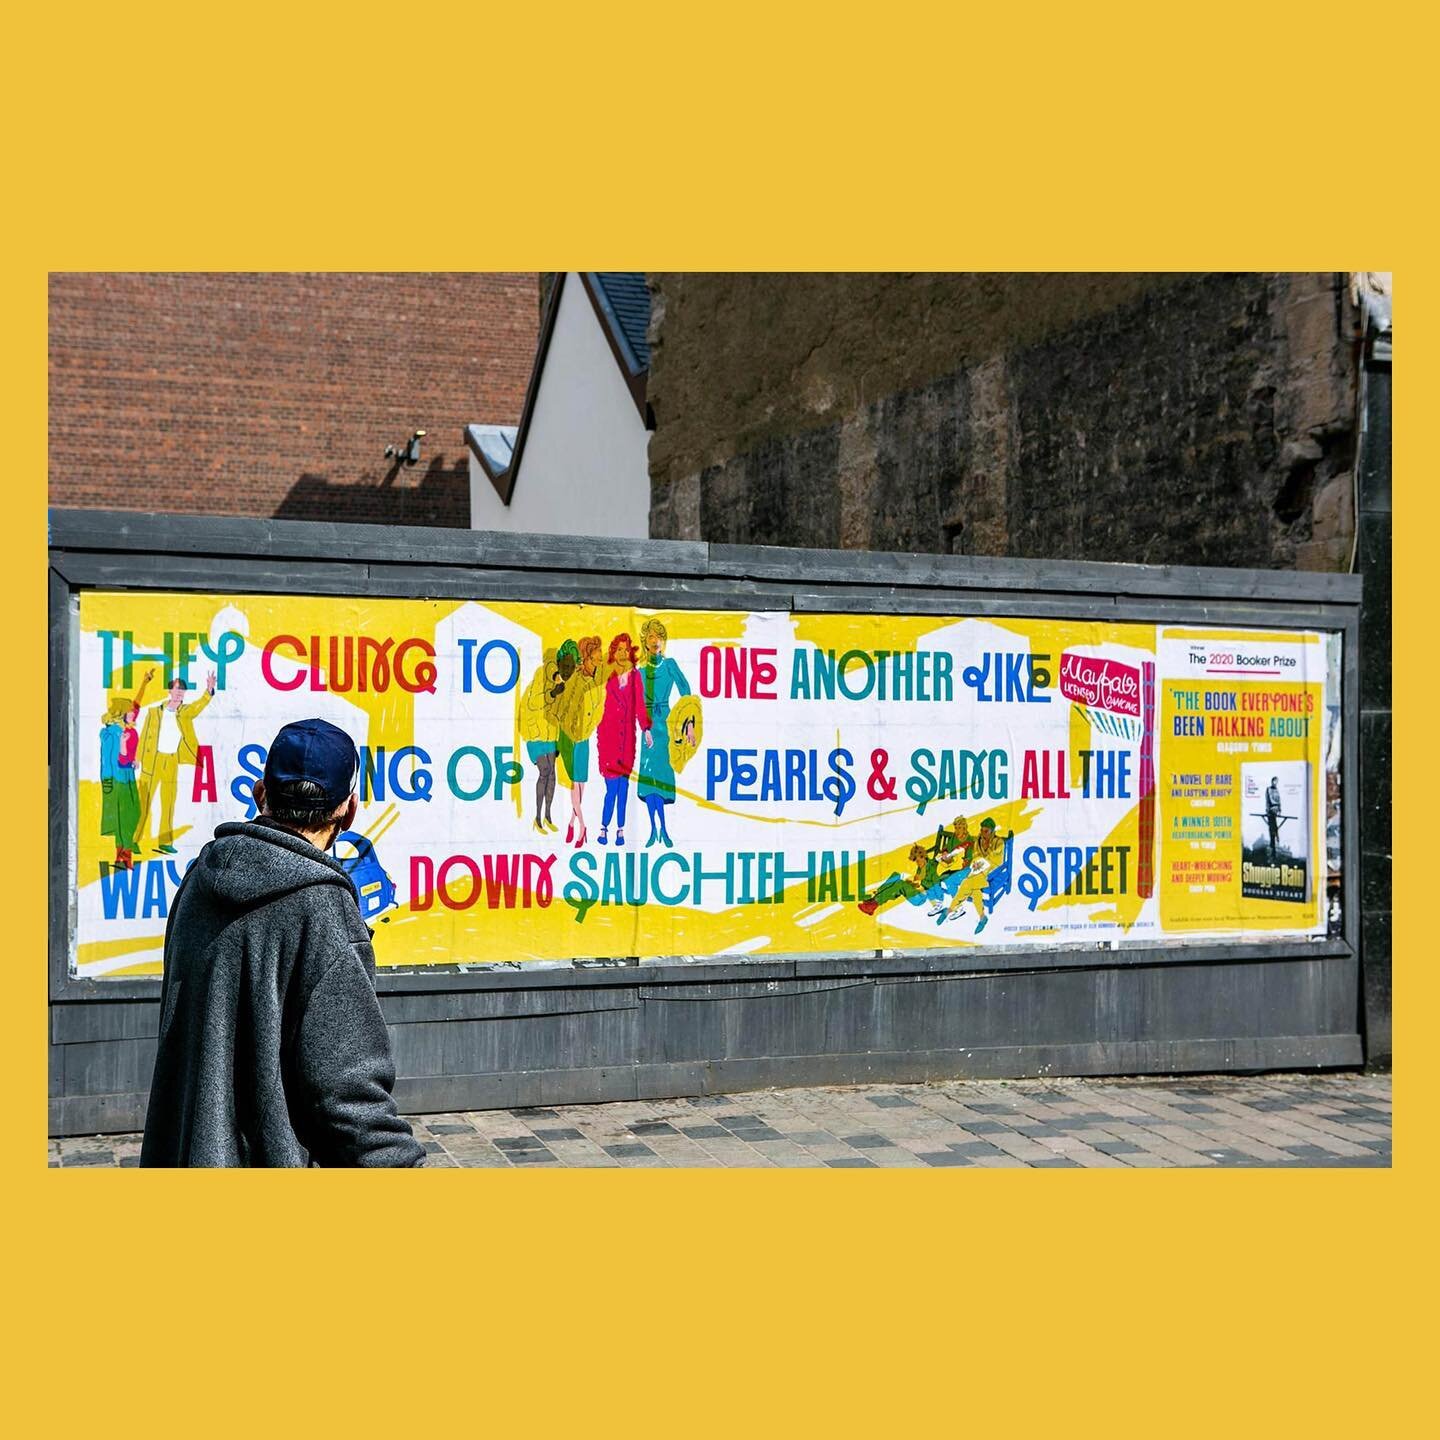 Having read and loved &lsquo;Shuggie Bain&rsquo; by @douglas_stuart at the start of this year, we were beyond delighted to be asked to paint a mural and design a poster to celebrate the beautiful novel set in our beloved hometown of Glasgow. The book